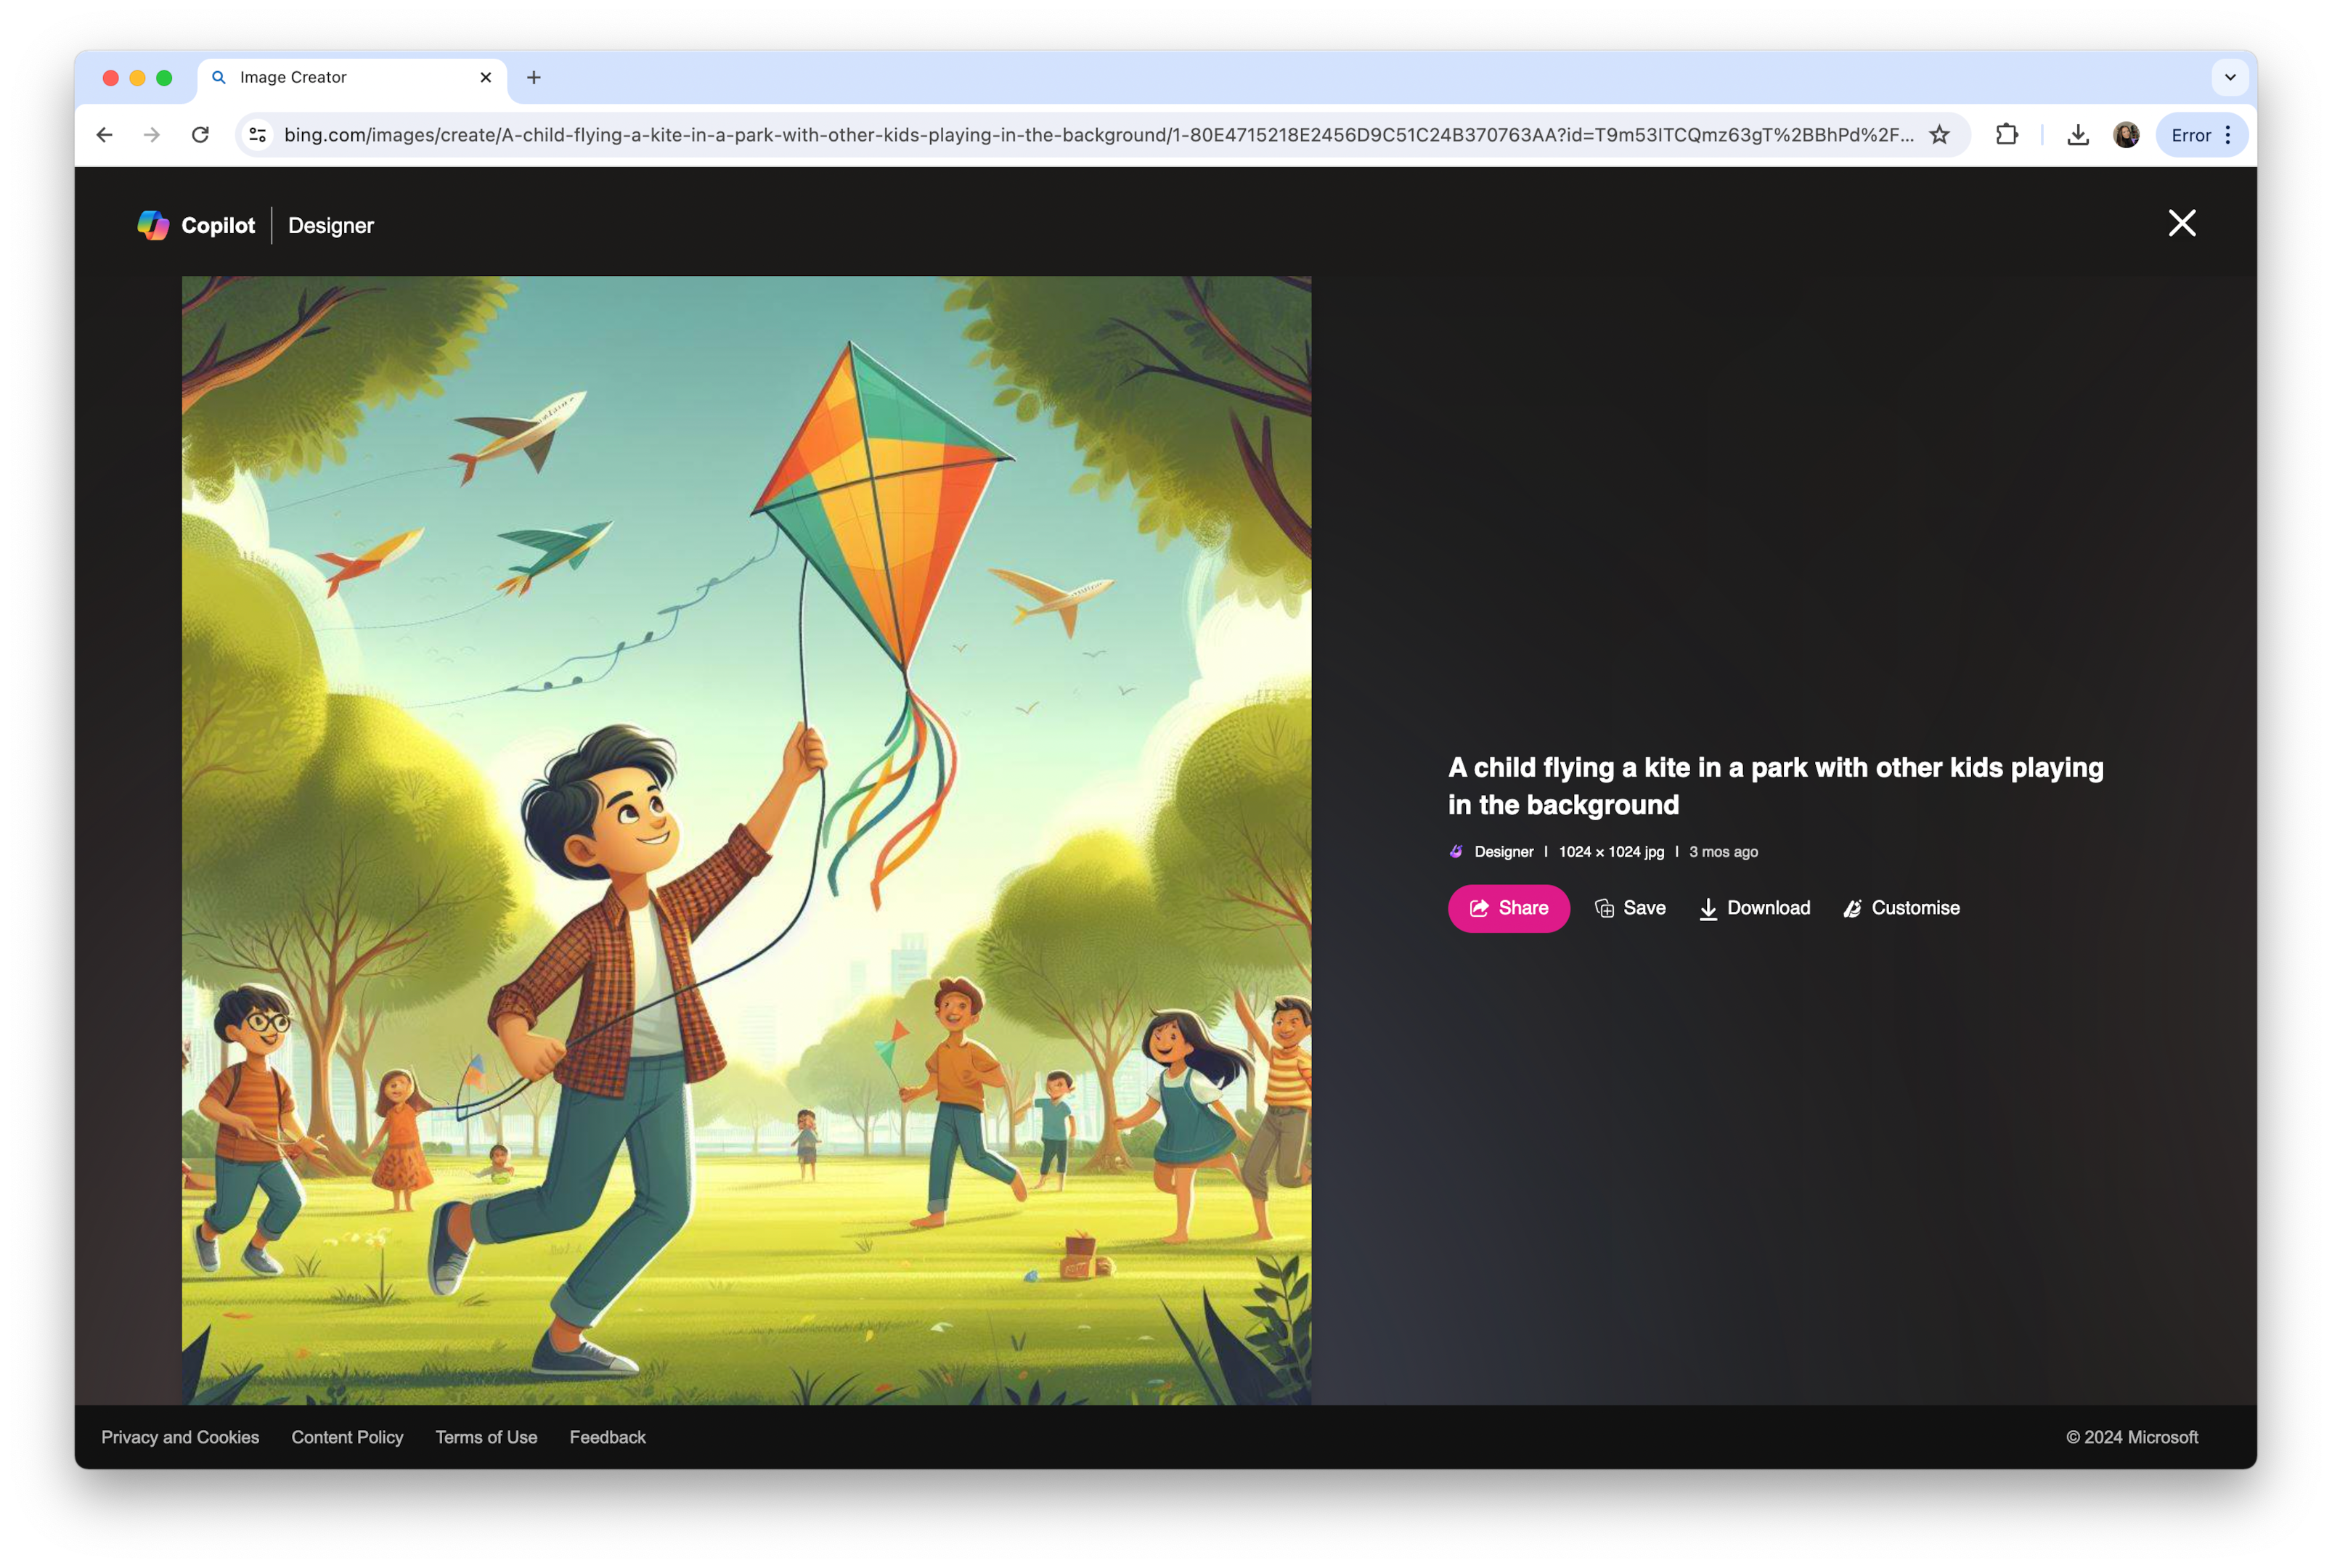 ai image of a boy flying a kite